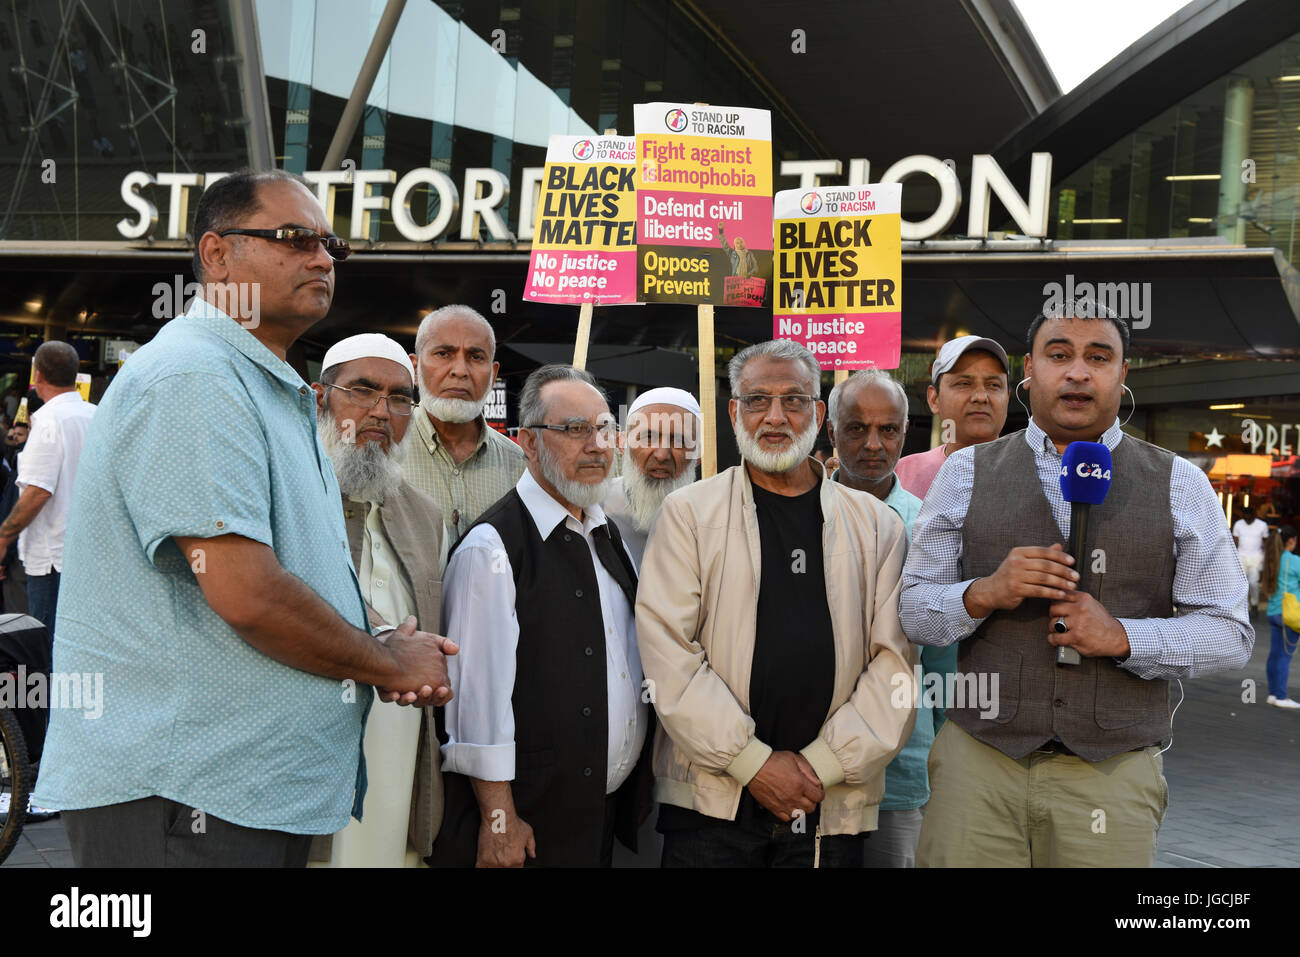 London, UK. 05th JUL 2017. 'STOP ACID ATTACKS' emergency protest outside the Stratford station in East London. Protesters gathered to protest against the recent acid attacks and increasing Islamophobia. C44 UK News journalist is reporting on the protest from outside the Stratford Station. Credit: ZEN - Zaneta Razaite / Alamy Live News Stock Photo